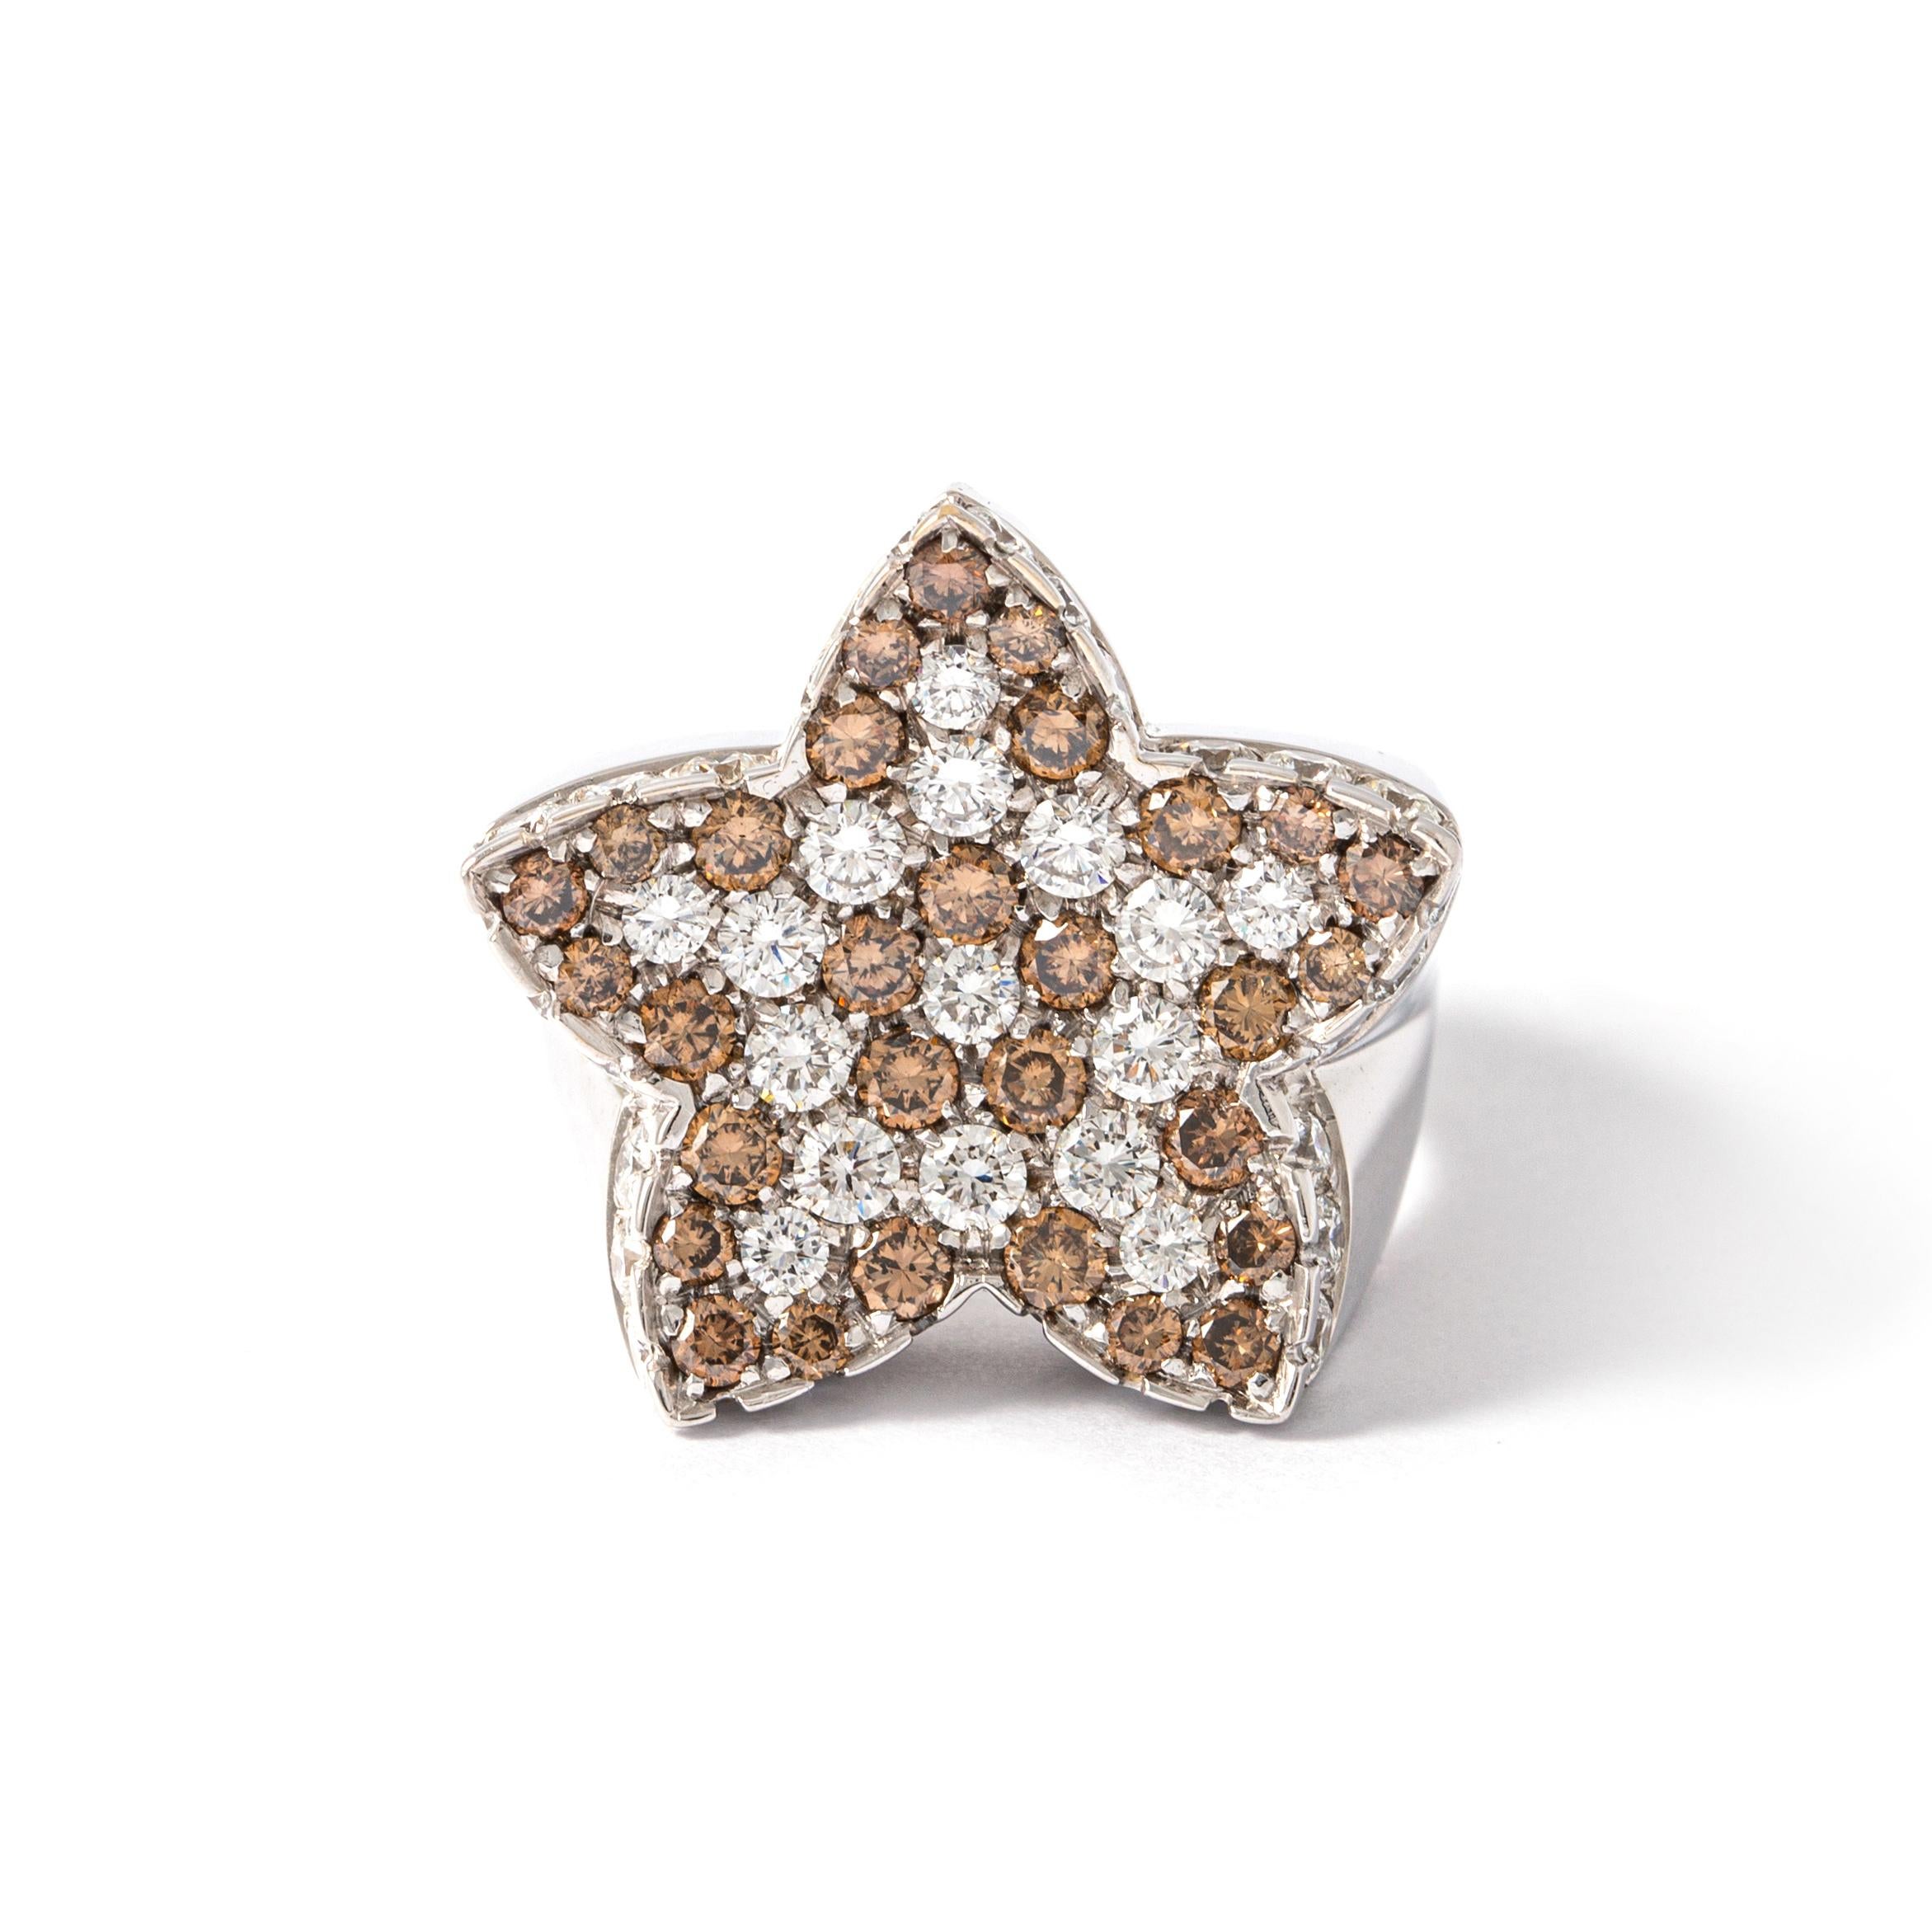 Star ring in 18kt white gold set with 46 diamonds 1.88 cts and 30 brown diamonds 1.28 cts Size 56

Total weight: 18,61 grams.